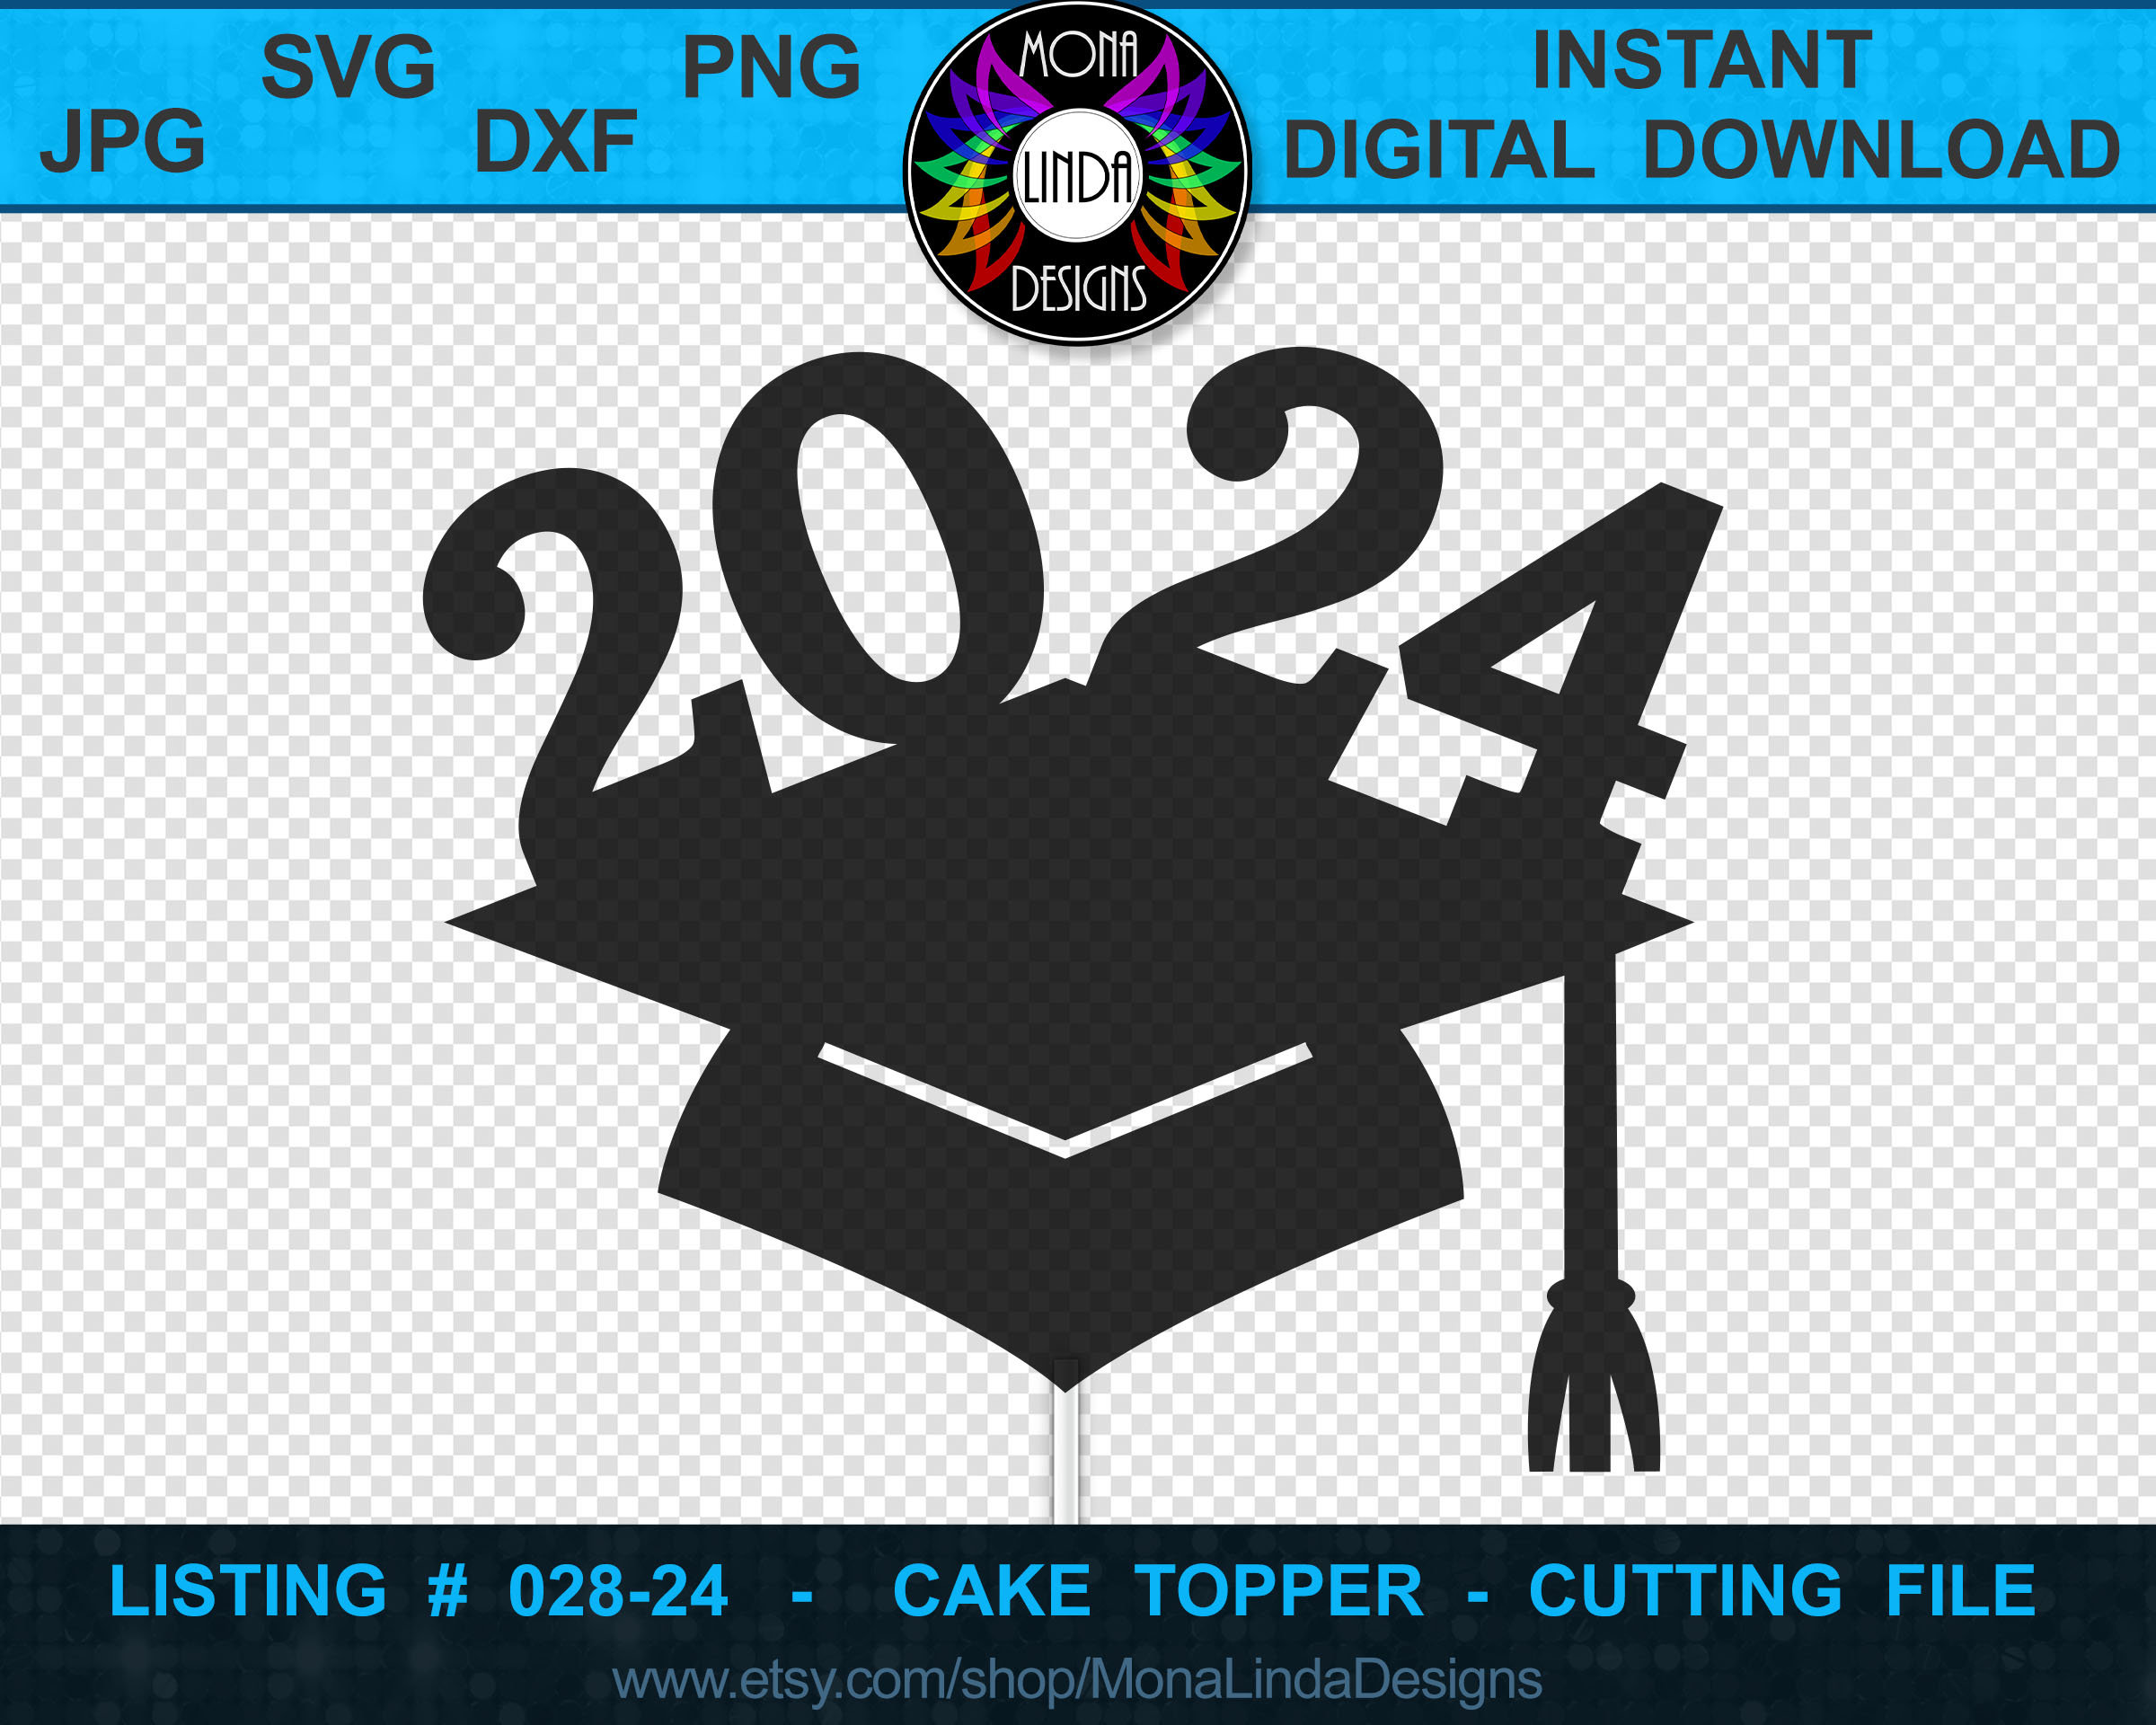 Cake Topper Class of 2024 SVG PNG DXF Jpg Cutting File Etsy Singapore